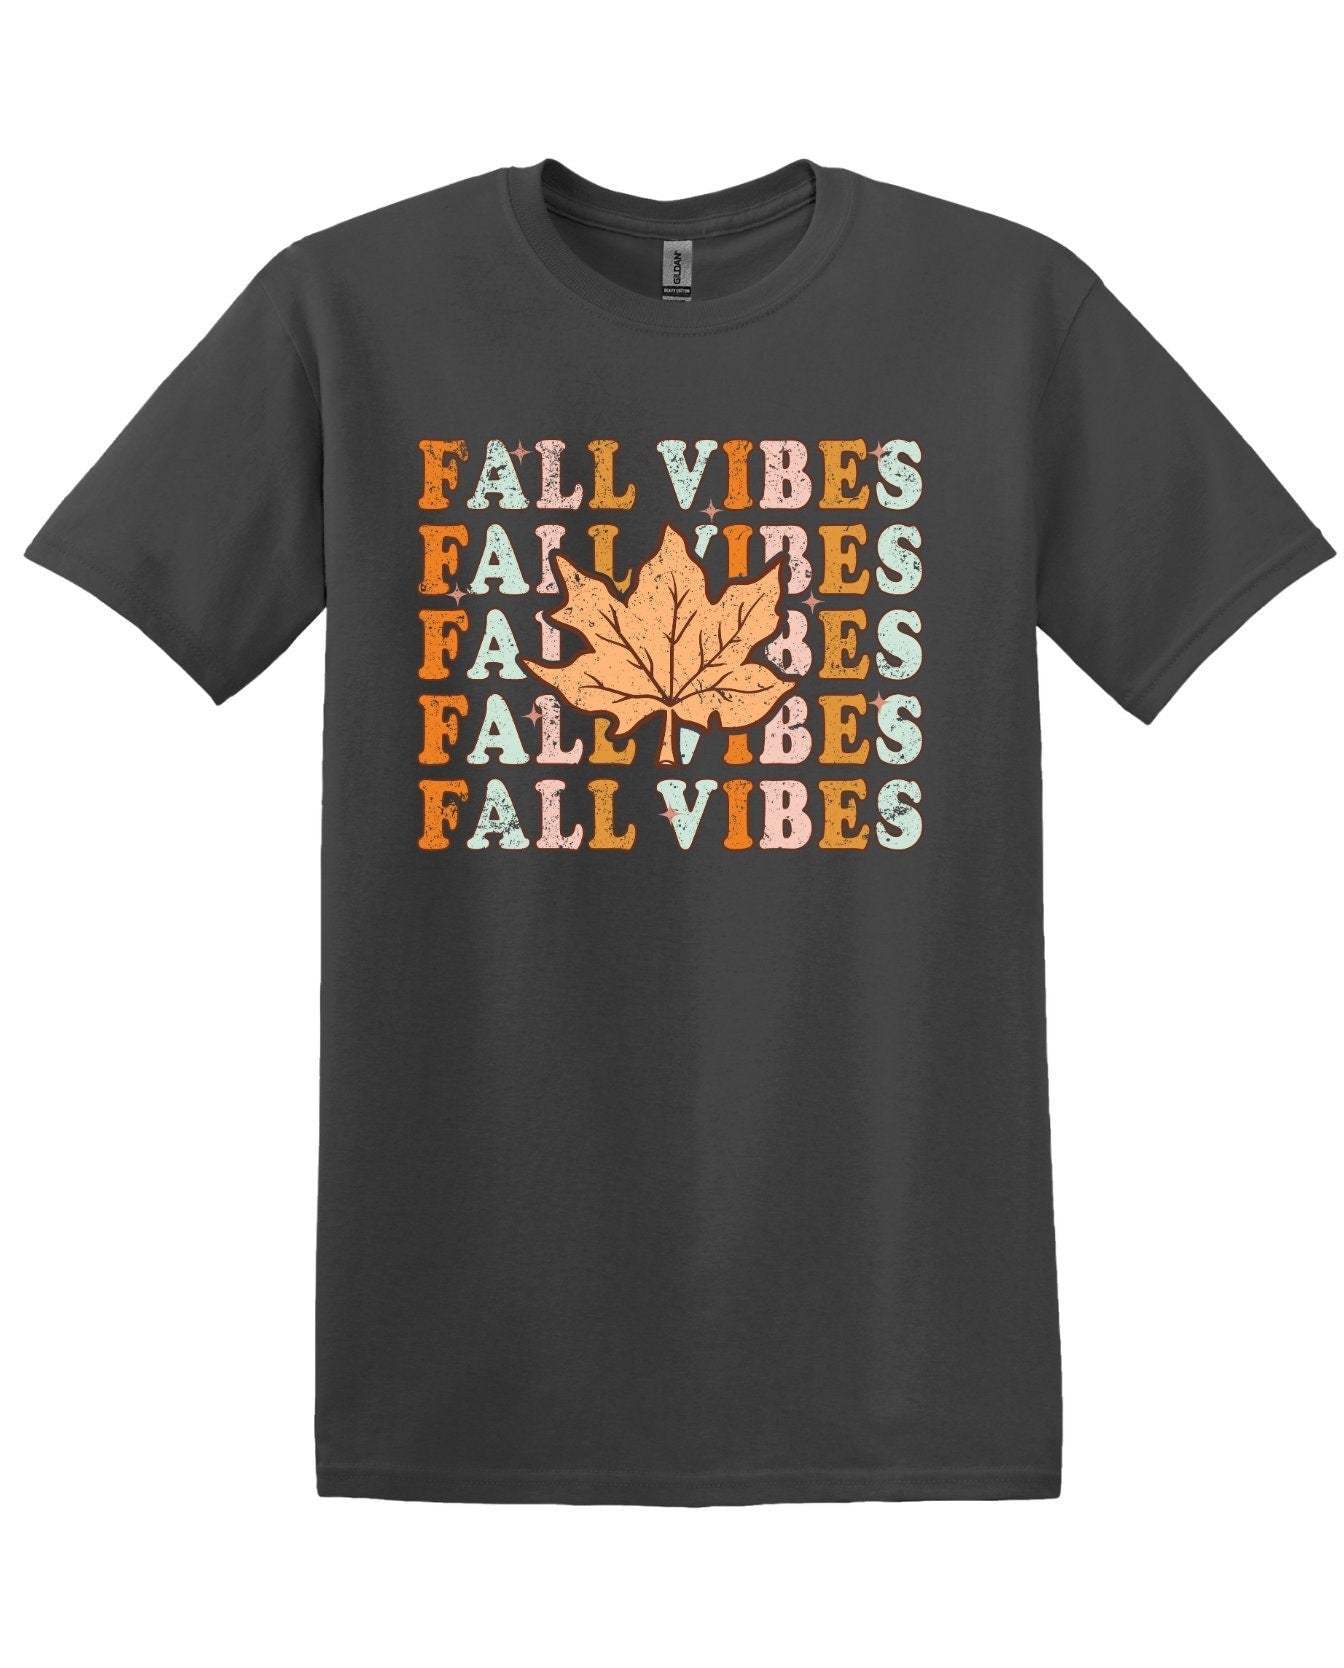 Fall Vibes; Long Sleeve and Short Sleeve Cotton Shirt, Adult Tee